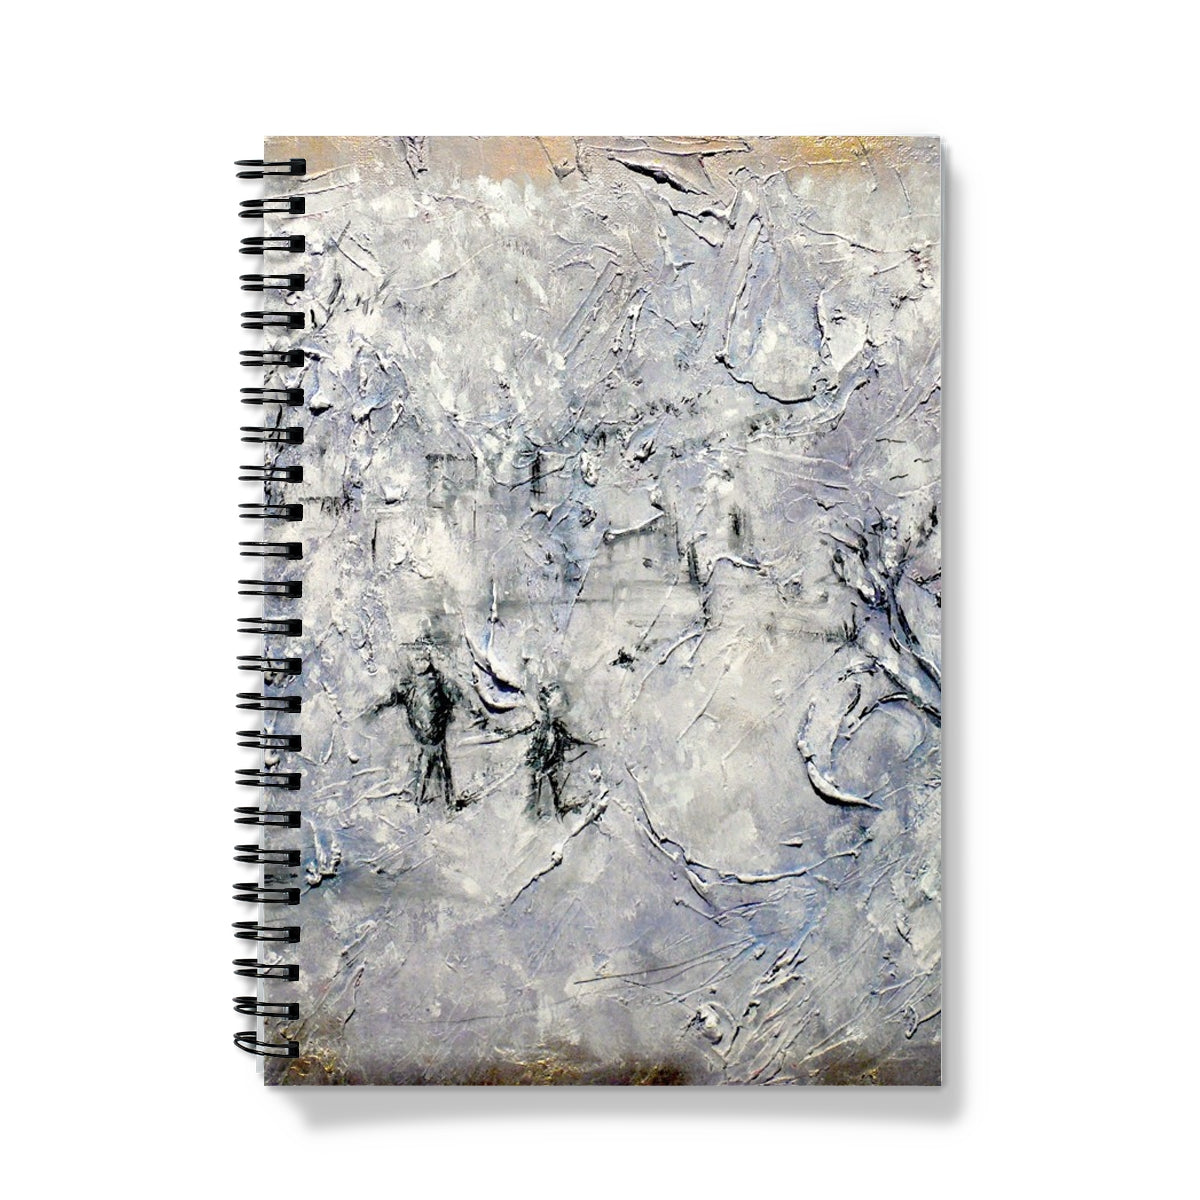 Father Daughter Snow Art Gifts Notebook-Journals & Notebooks-Abstract & Impressionistic Art Gallery-A5-Graph-Paintings, Prints, Homeware, Art Gifts From Scotland By Scottish Artist Kevin Hunter